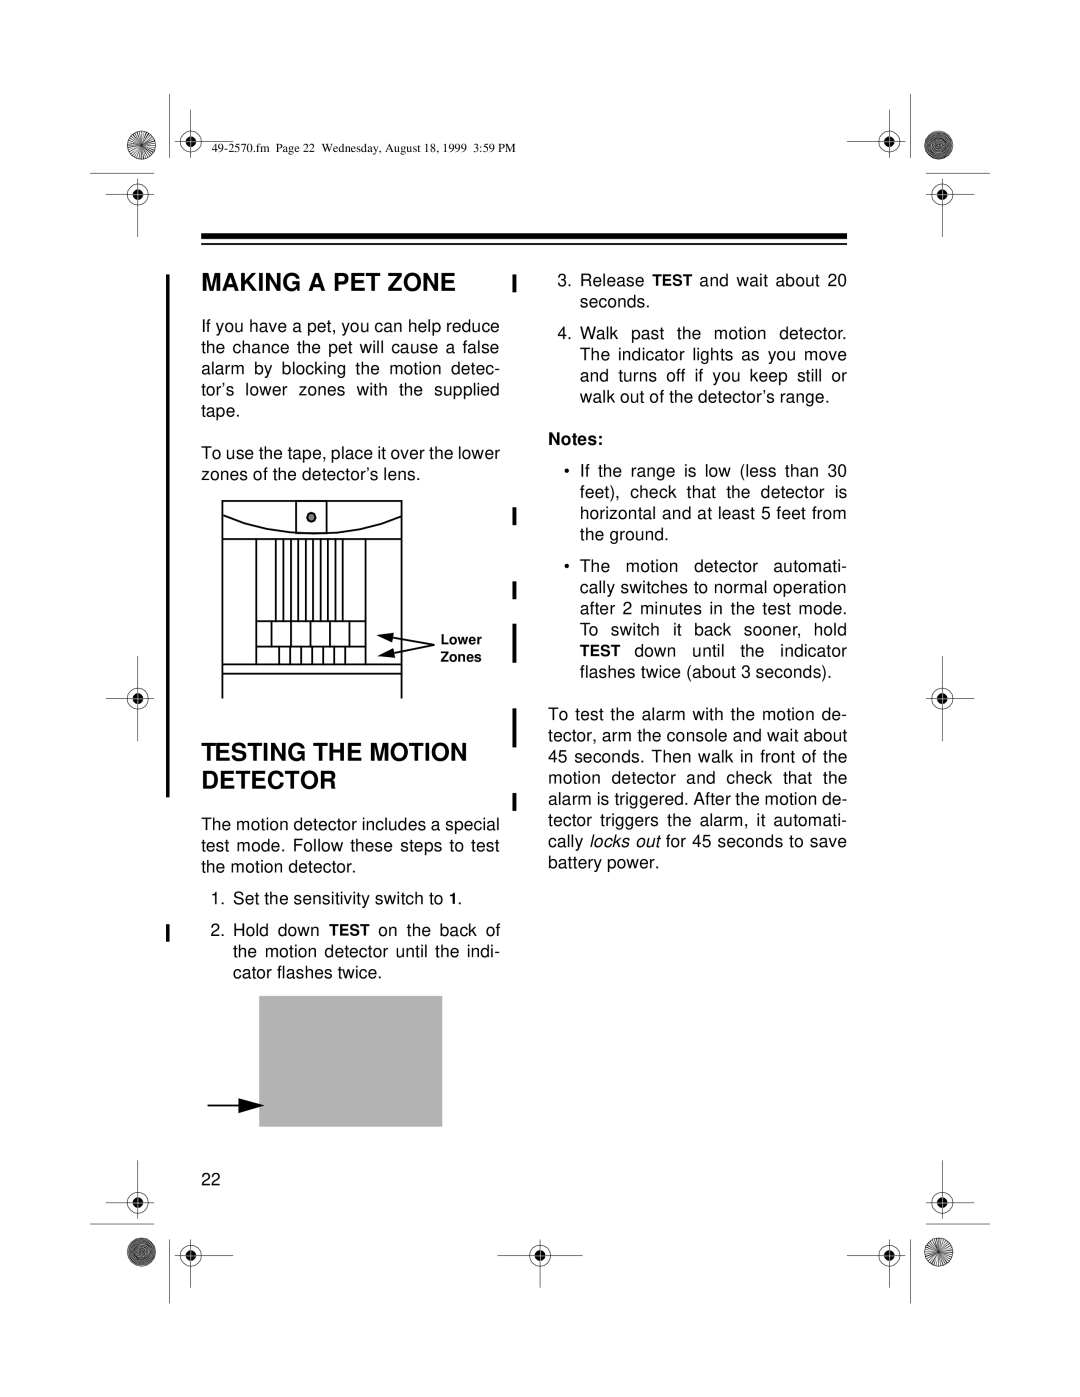 Radio Shack 49-2570 owner manual Making A Pet Zone, Testing The Motion Detector 